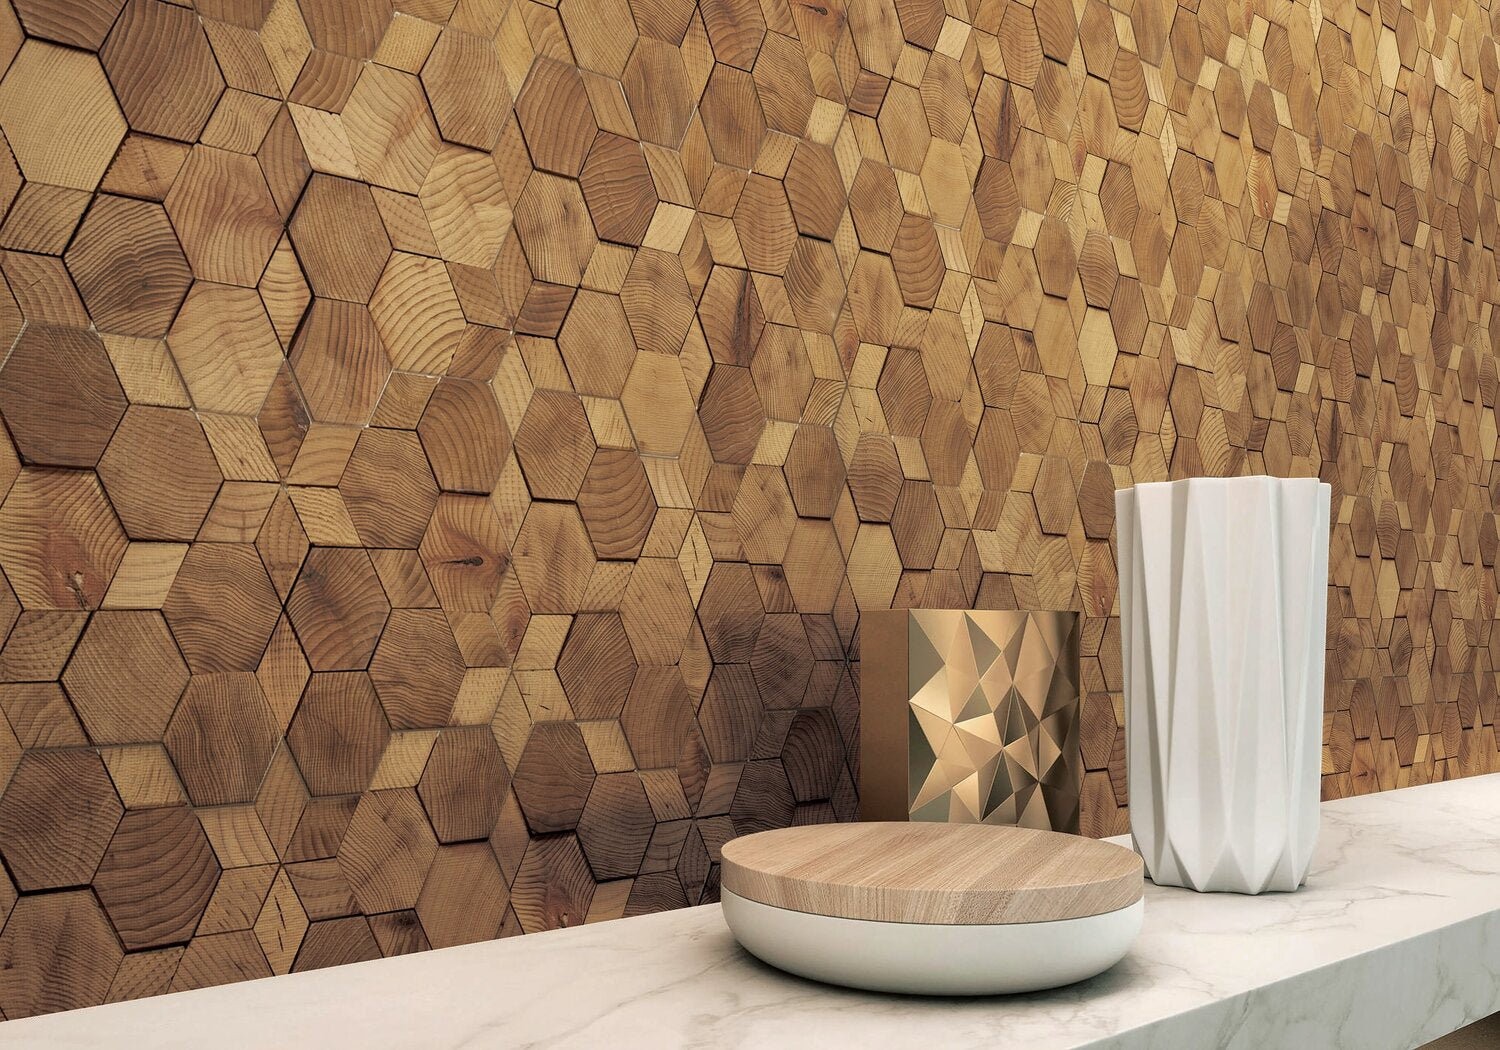 forest elements geometrical star 4 wood wall 3D mosaic natural pine accoustical decorative luxury interior distributed by surface group